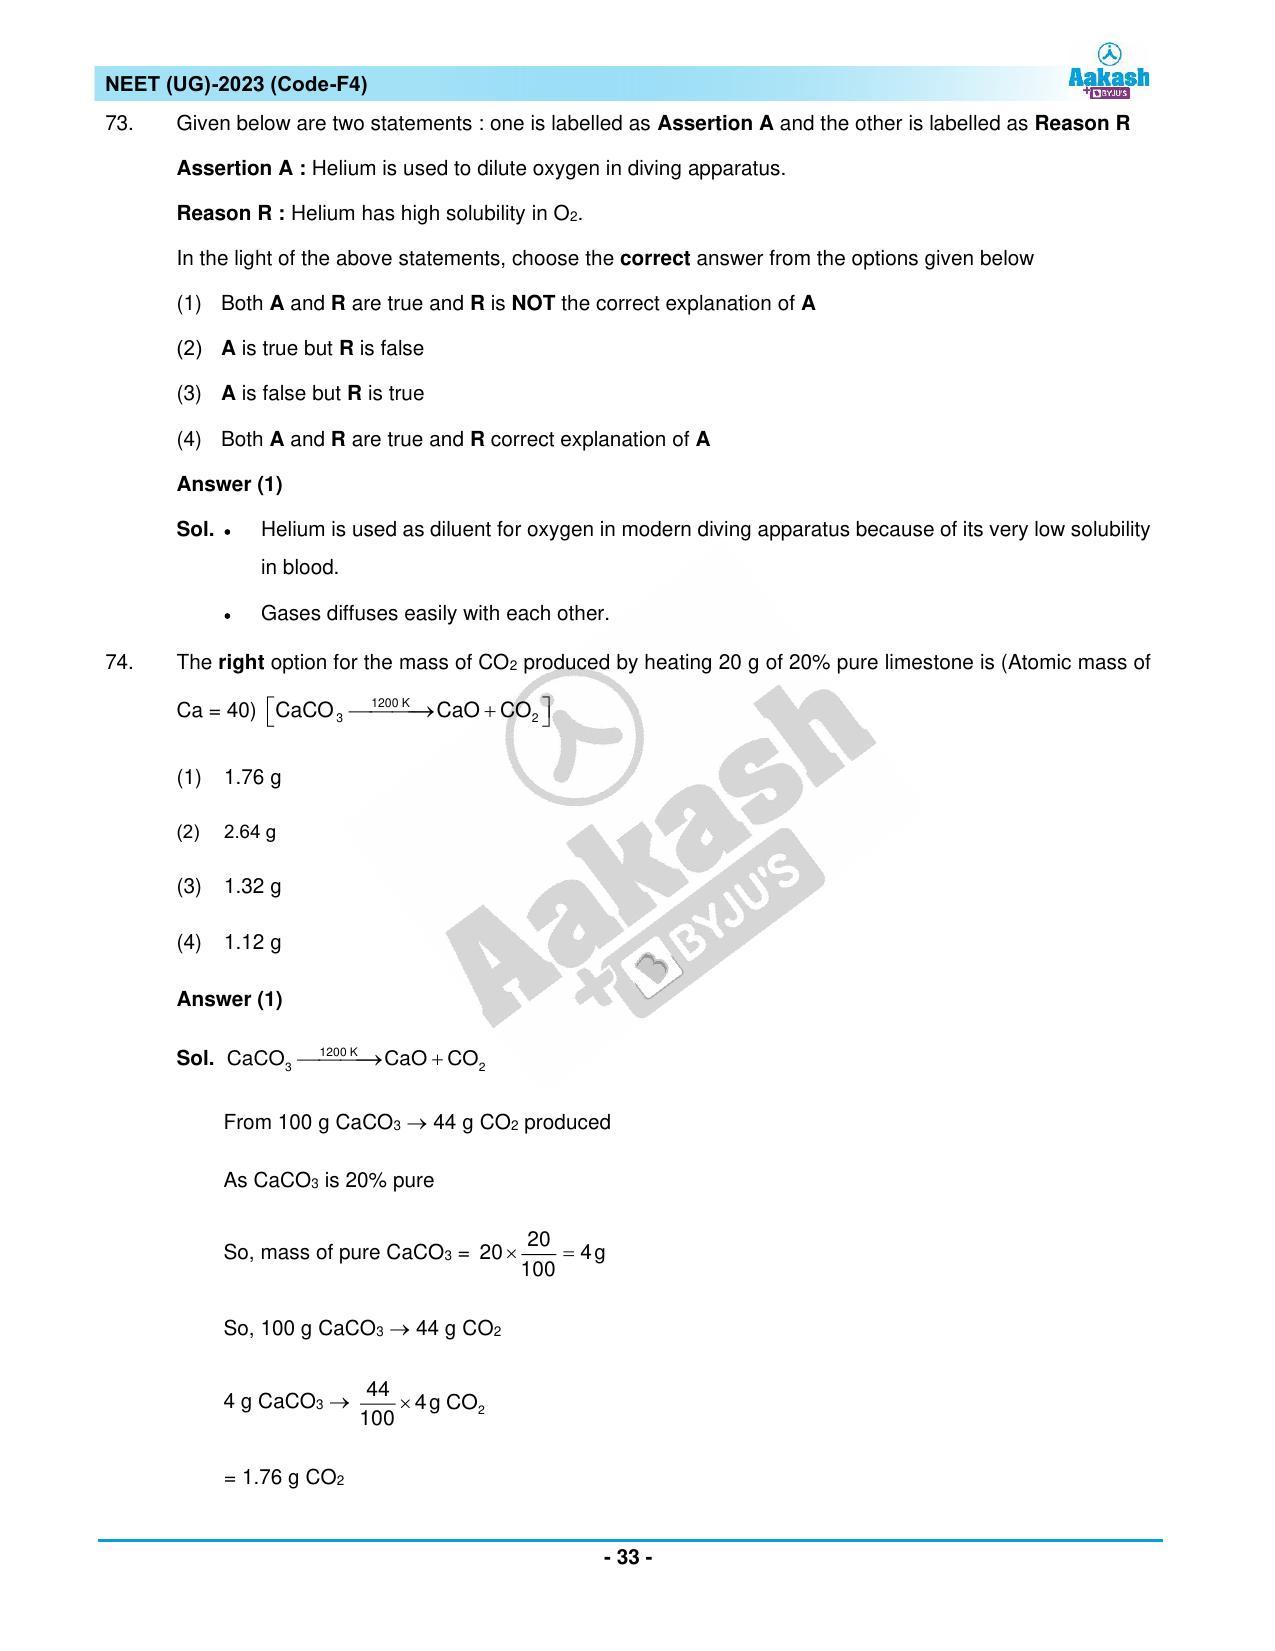 NEET 2023 Question Paper F4 - Page 33